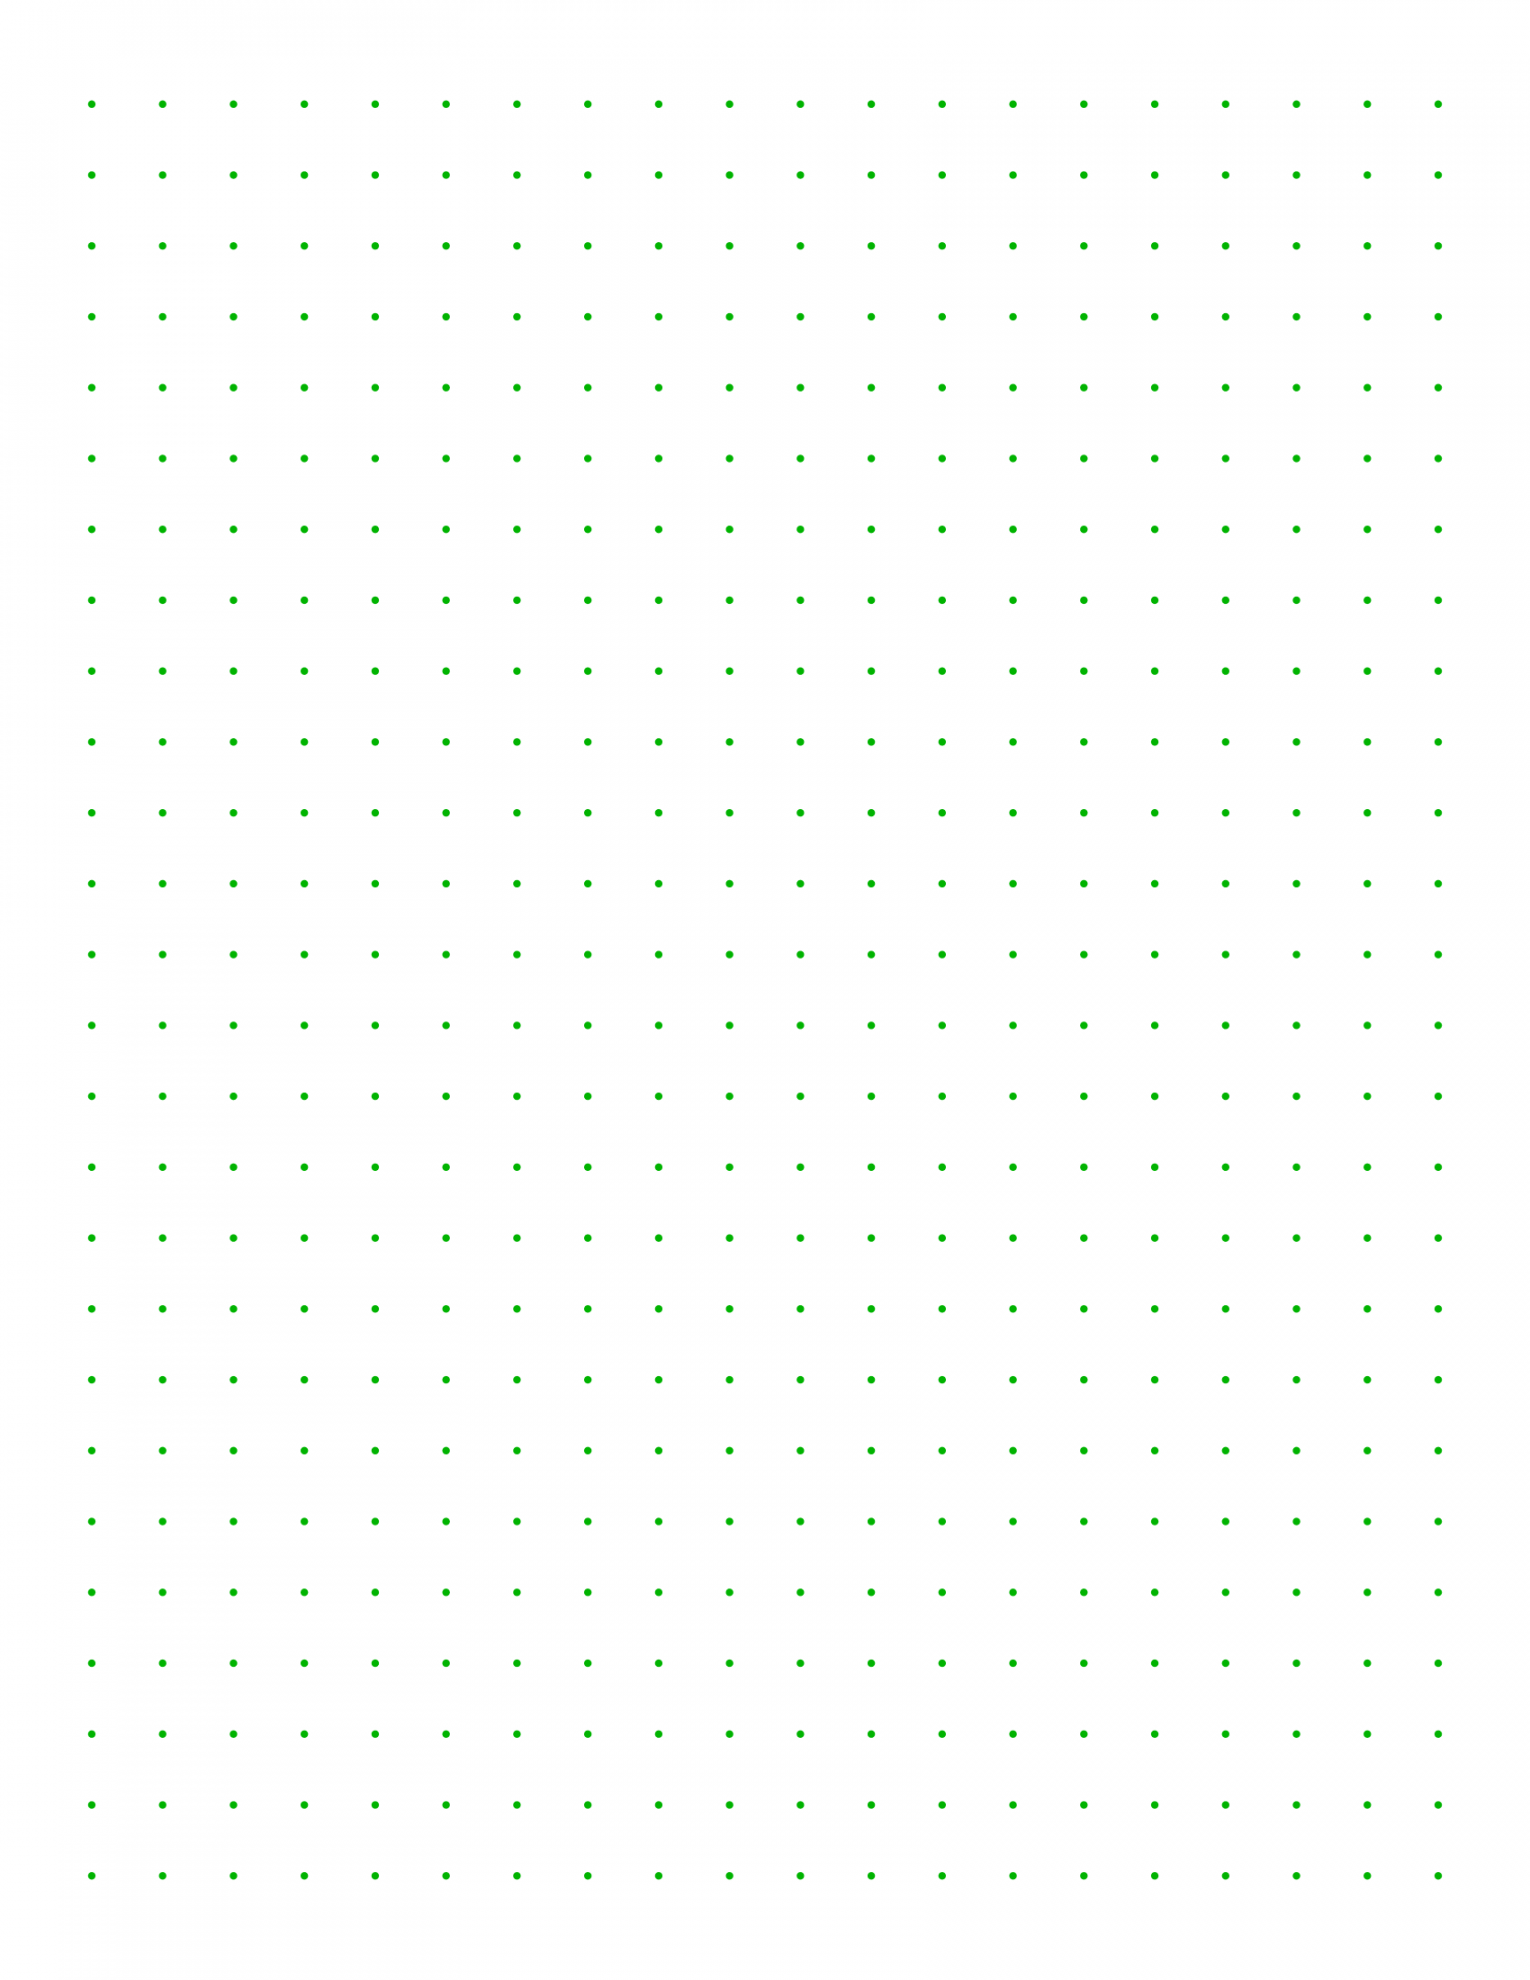 Free Online Graph Paper / Square Dots - FREE Printables - Page Of Dots